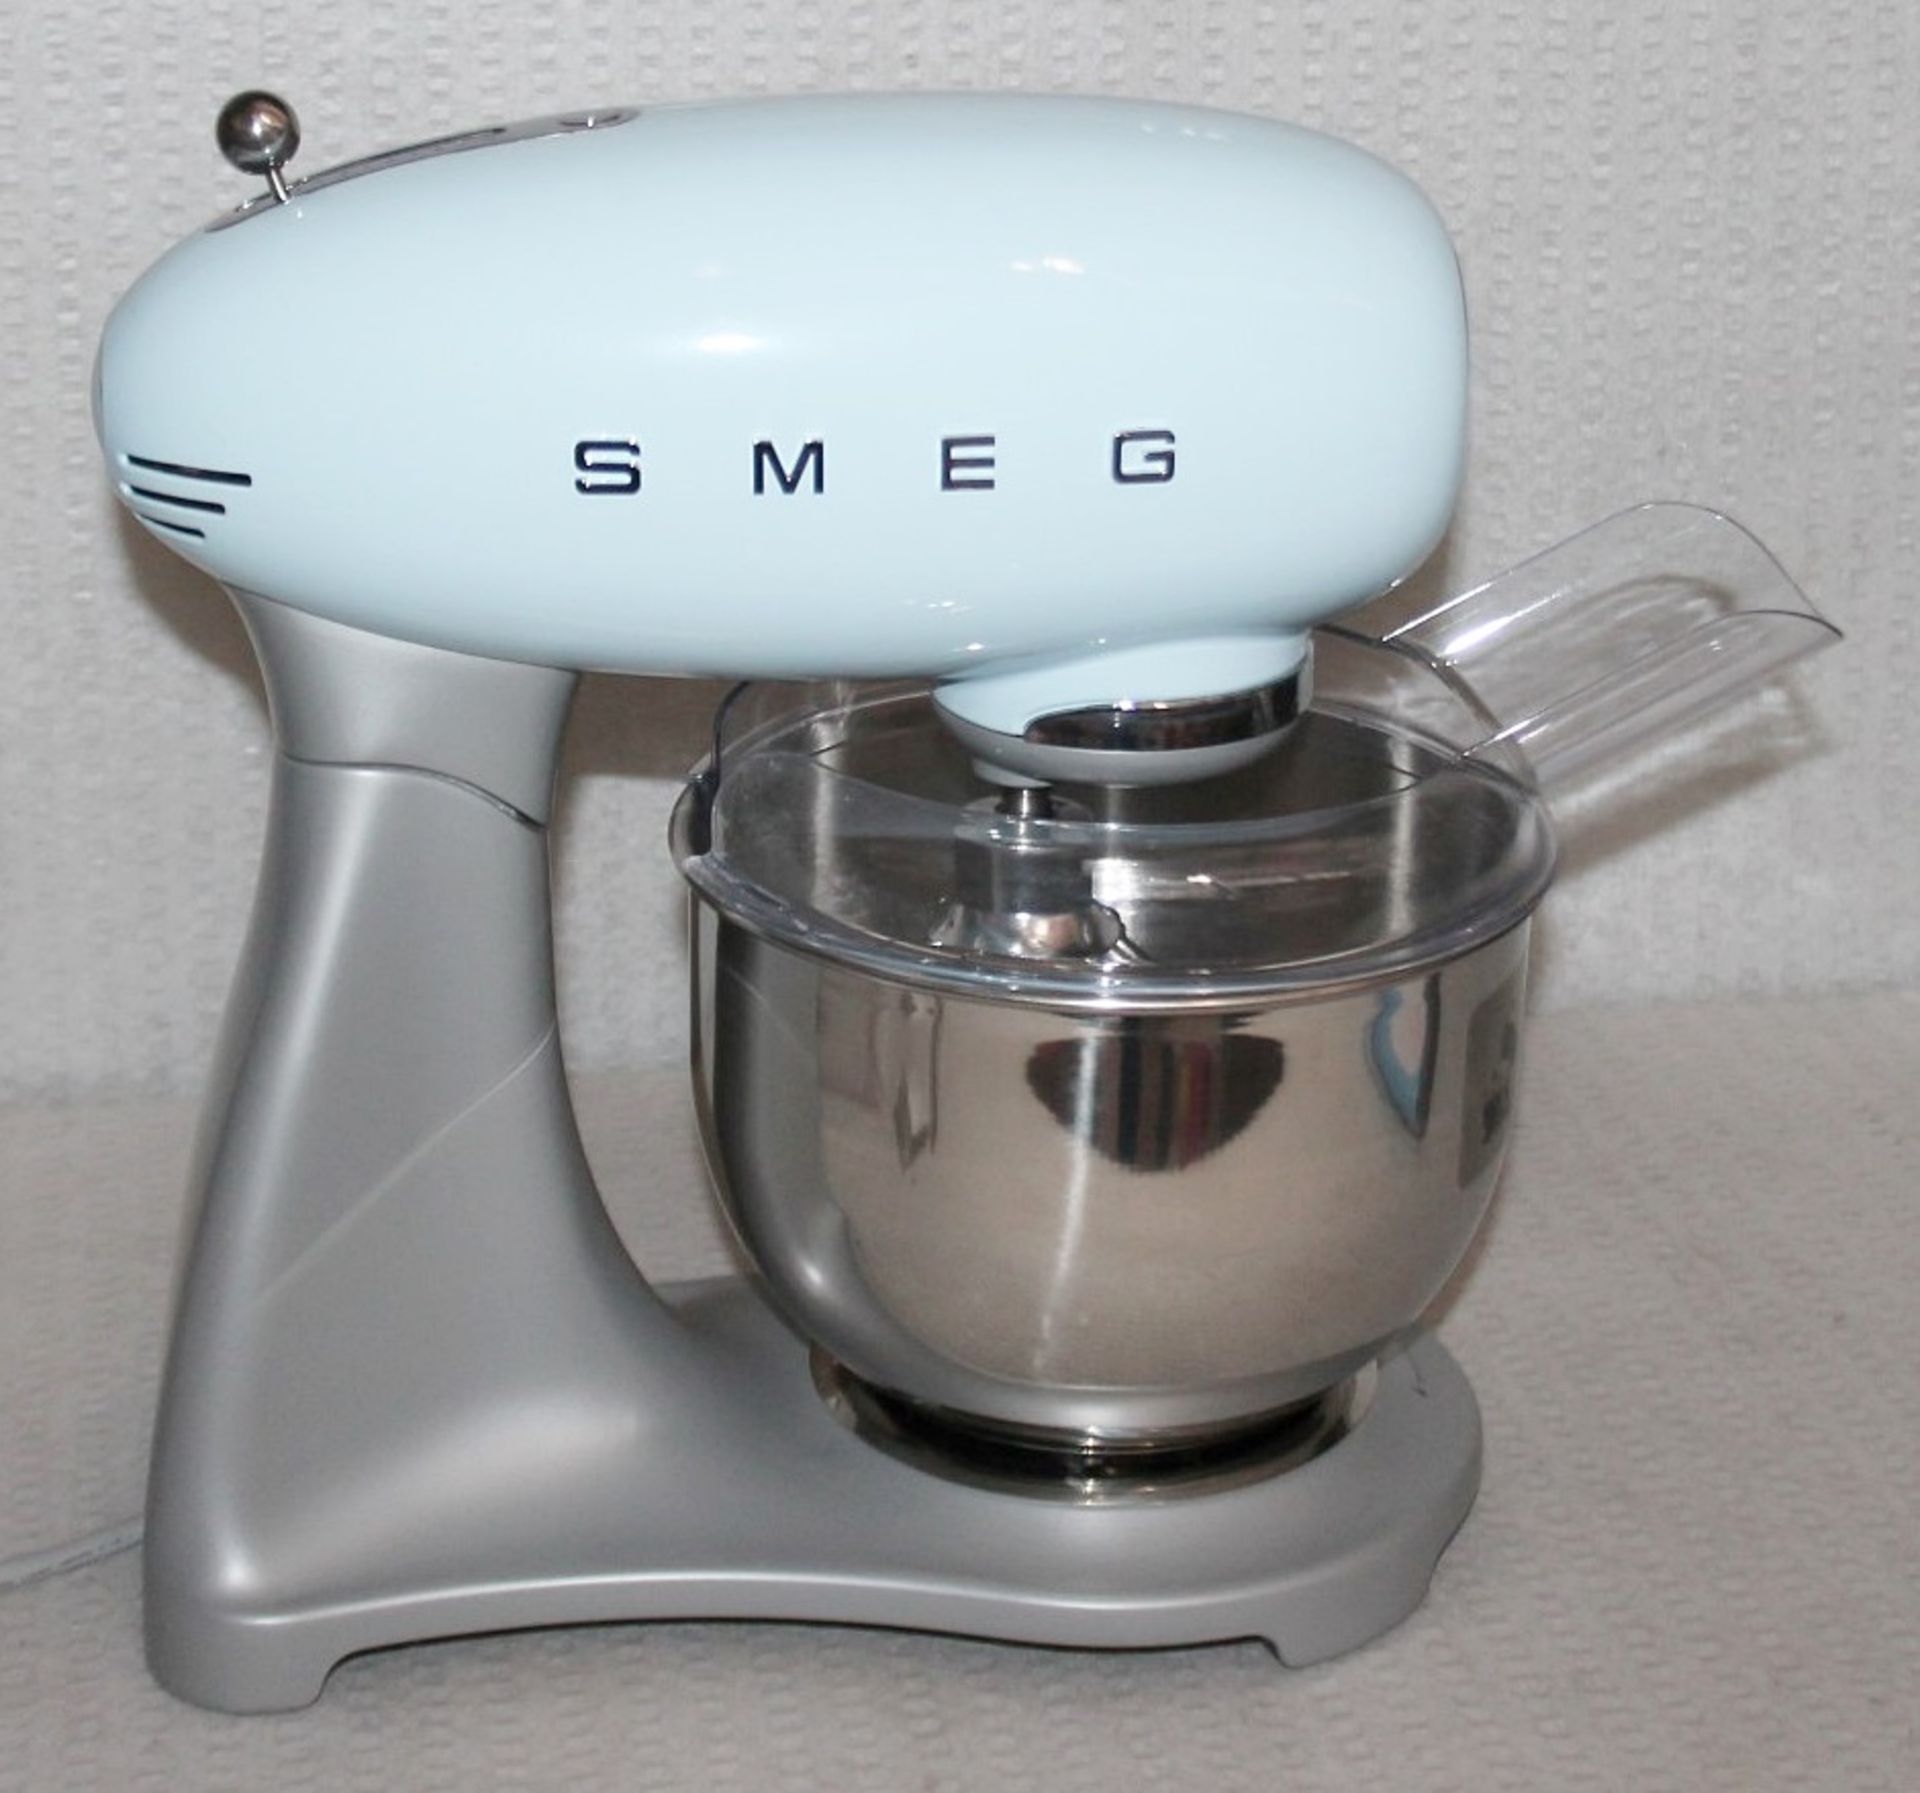 1 x SMEG 50'S Style Stand Mixer In Pale Blue (4.8L) Original Price £449.00 - Ex-Display - CL987 - - Image 4 of 14